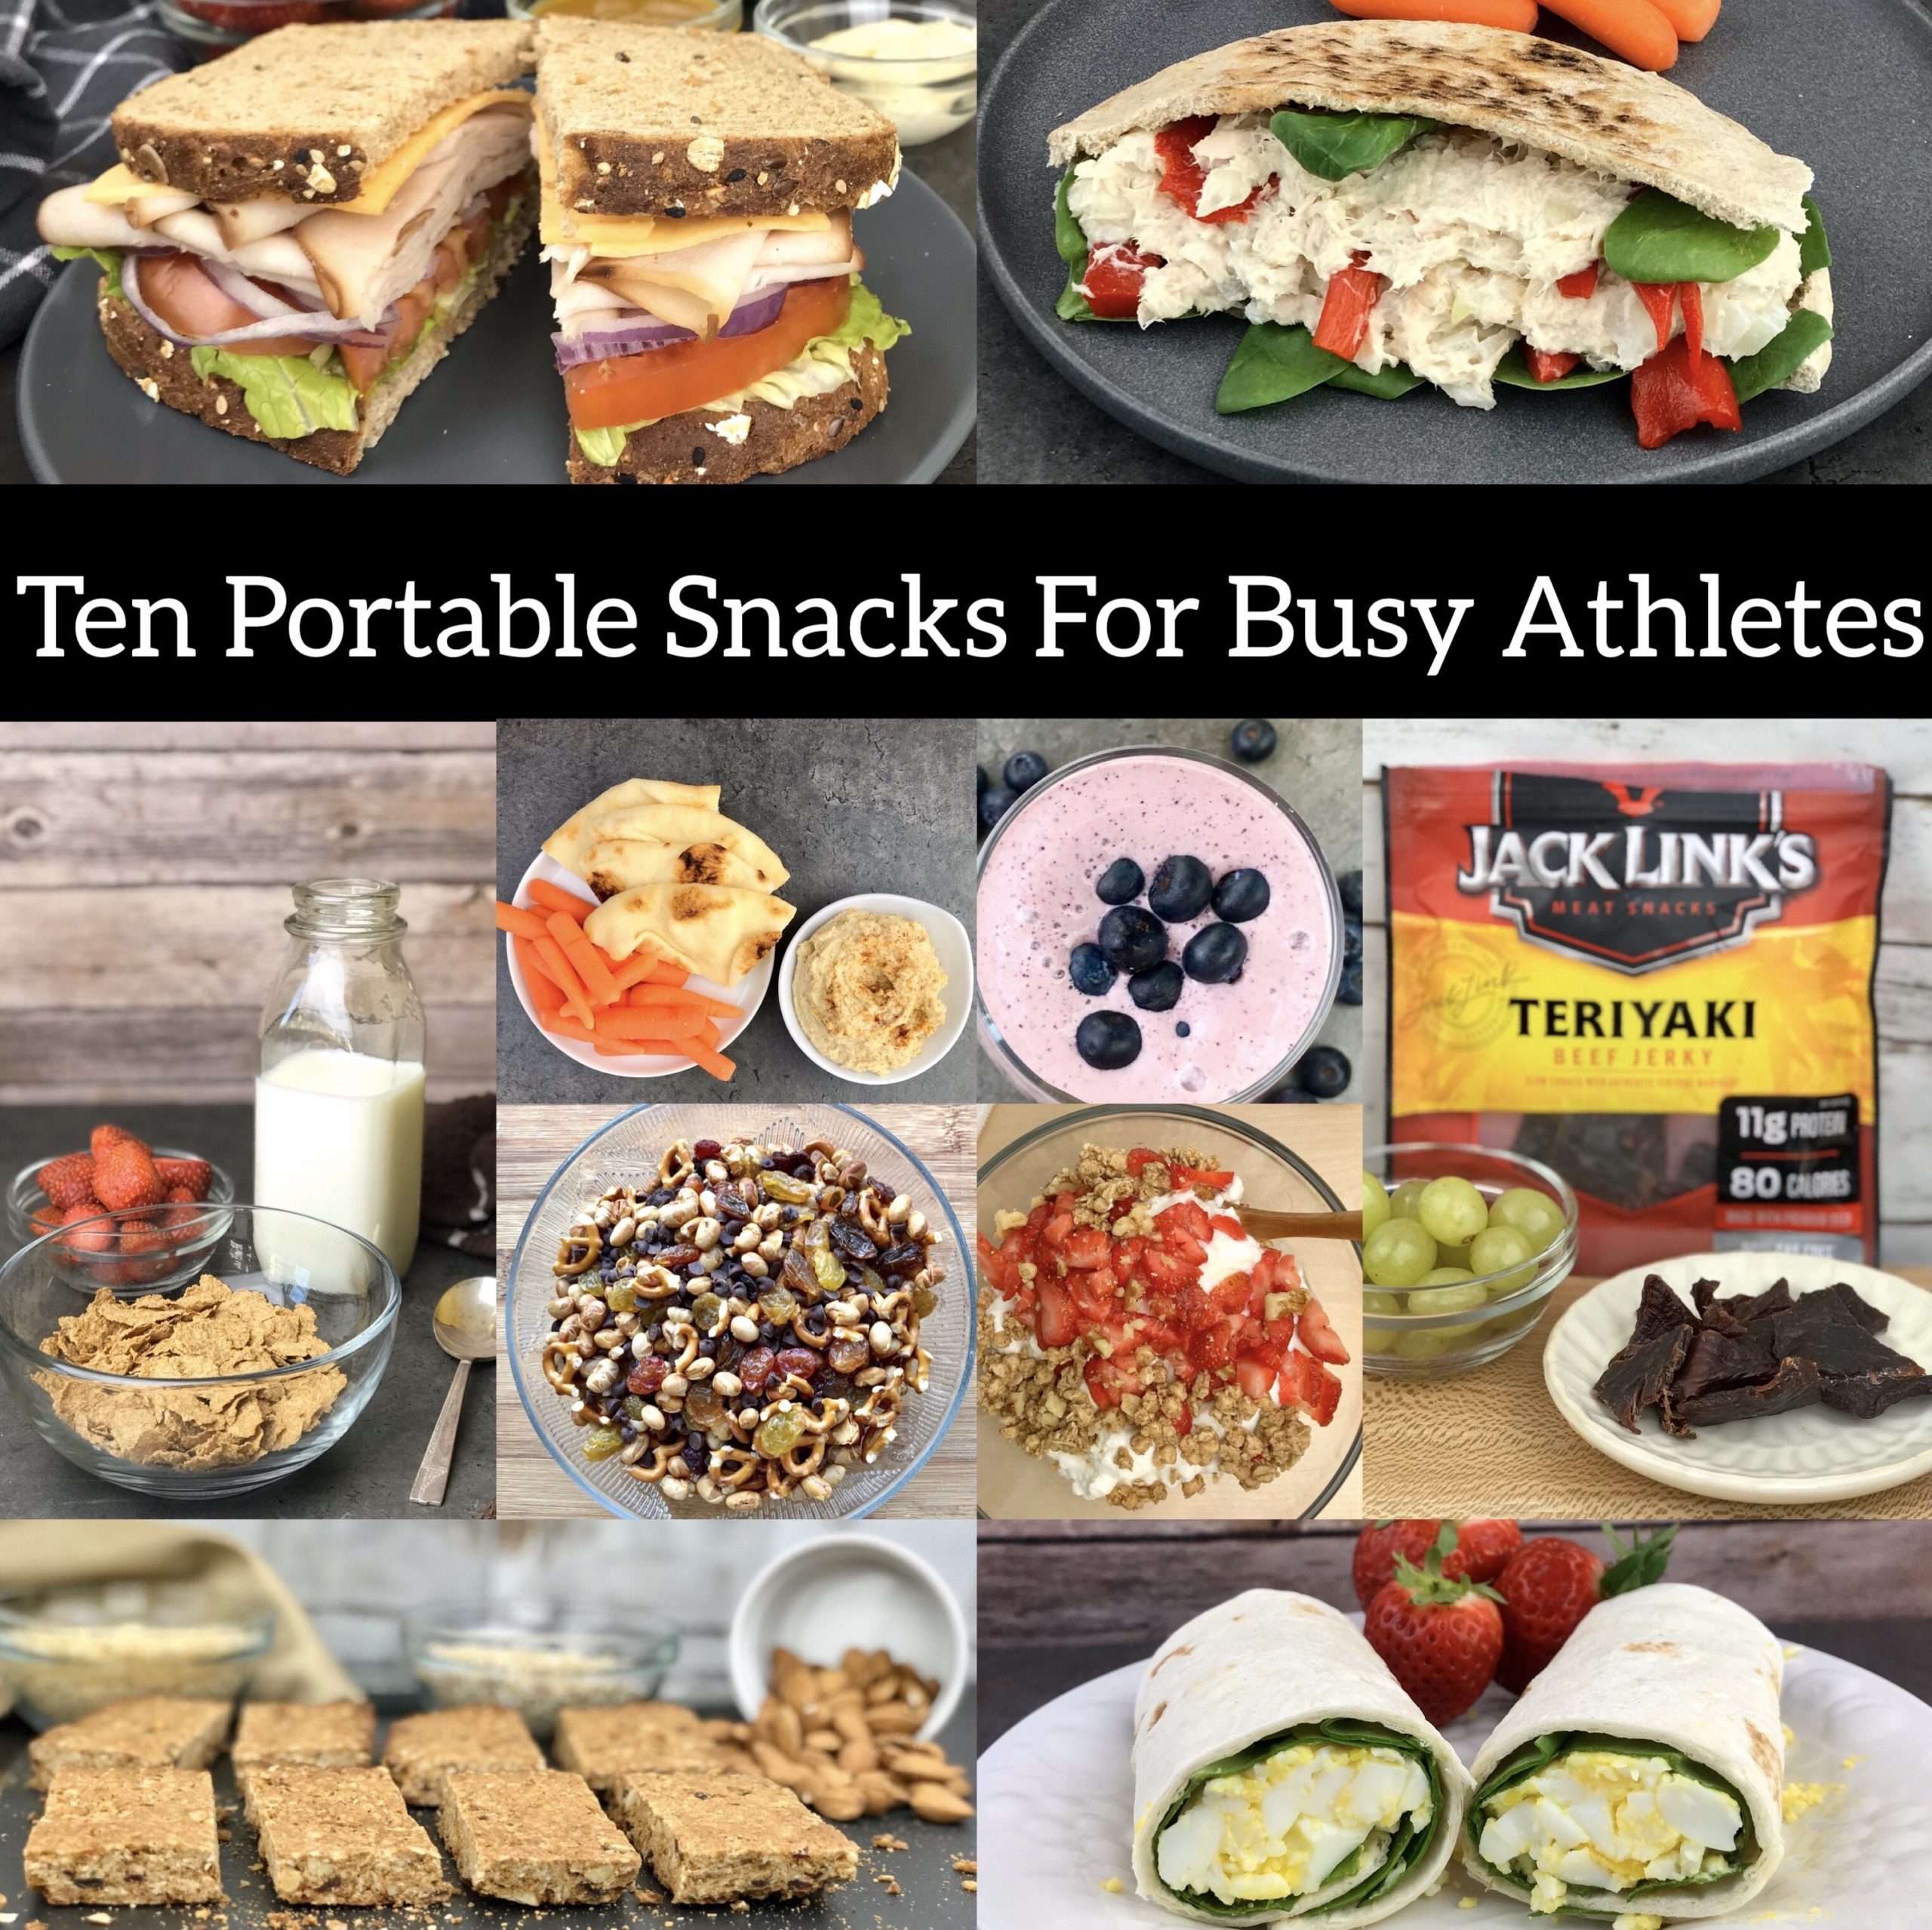 Snack ideas for athletes